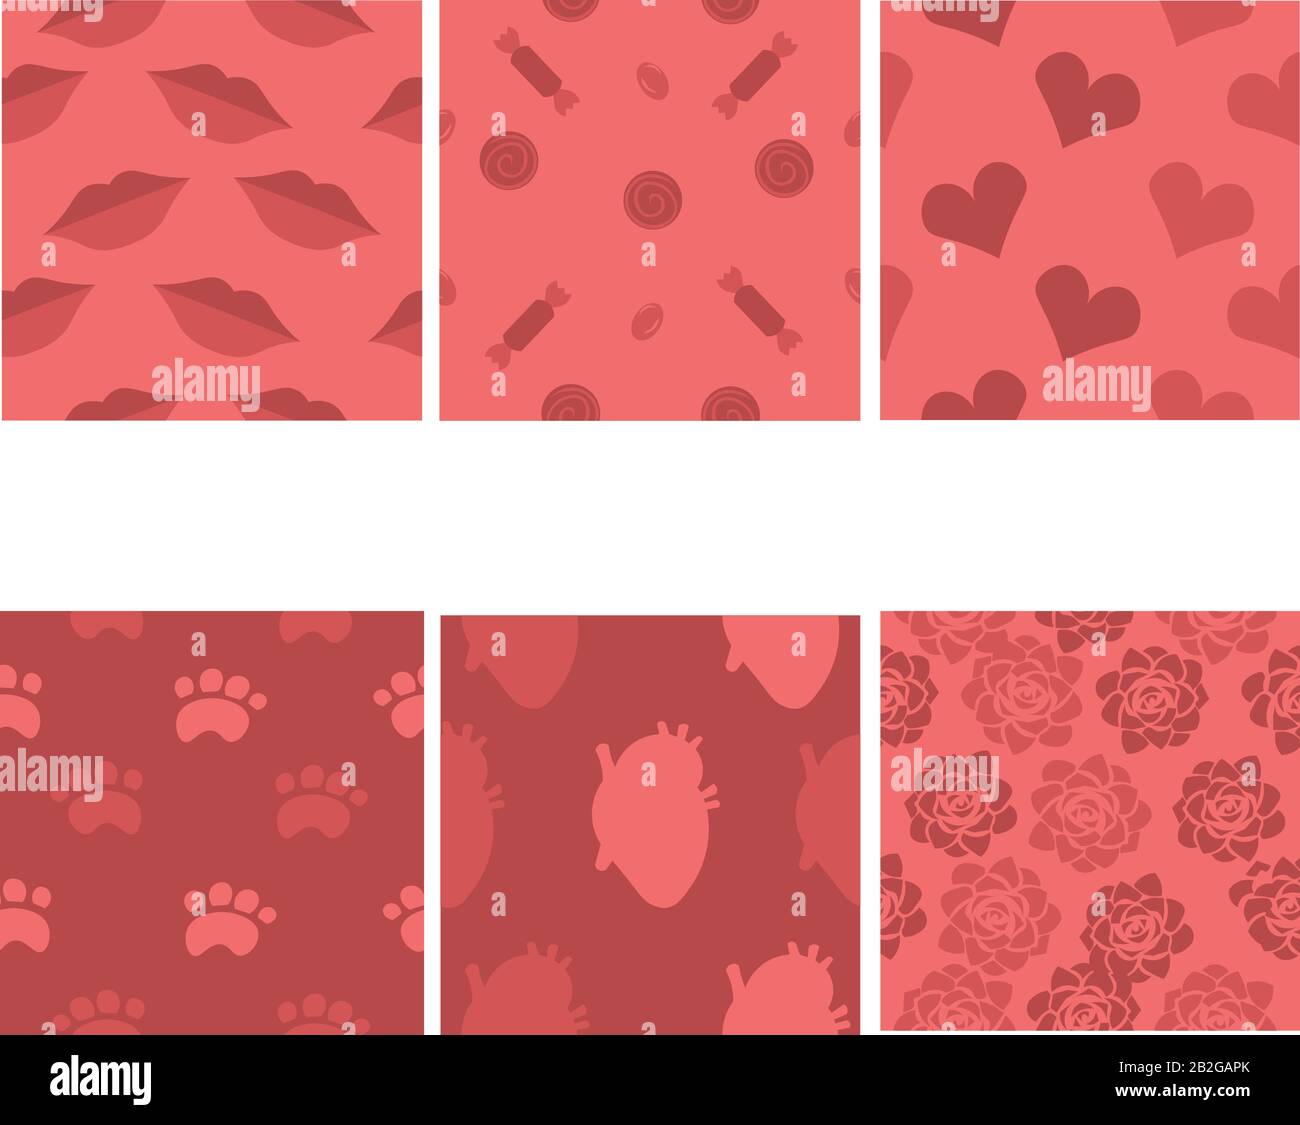 Set of pink patterns. Valentine's Day. Love and romance. Design for cards, invitations, gifts. Stock Vector